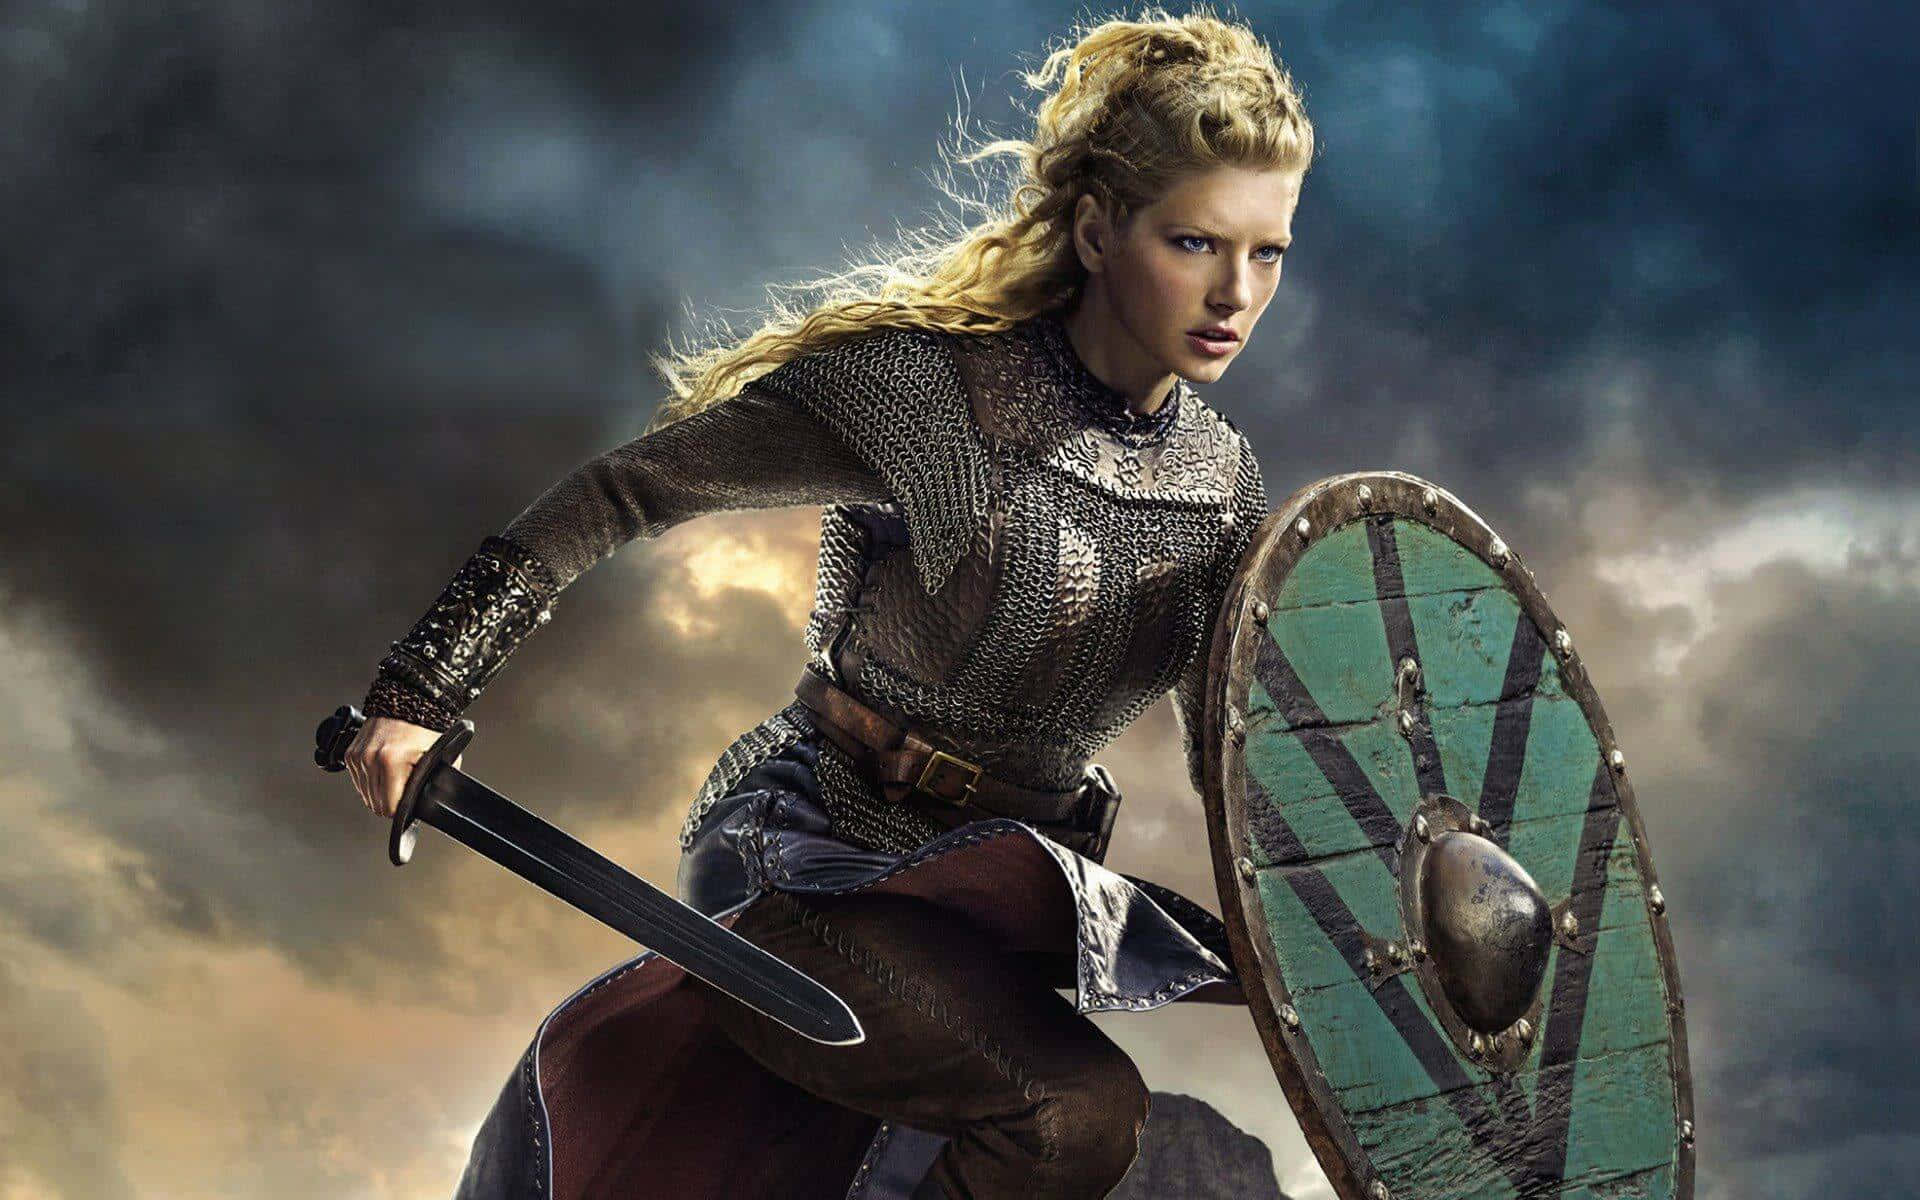 A female Viking Warrior stands ready to defend against enemies.